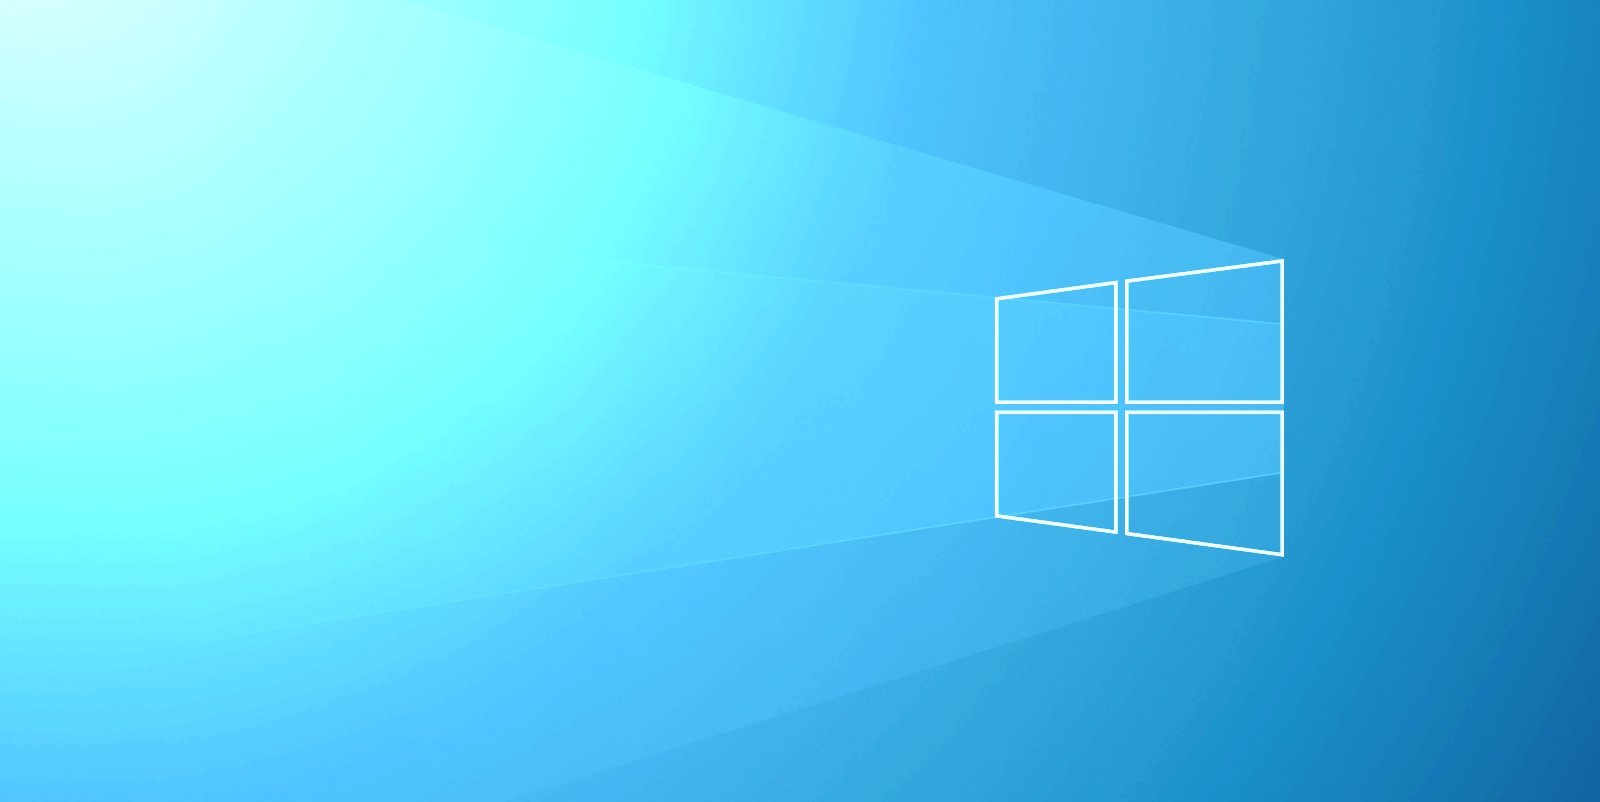 Windows 10 gaming issues fixed in KB5004296 — How to download